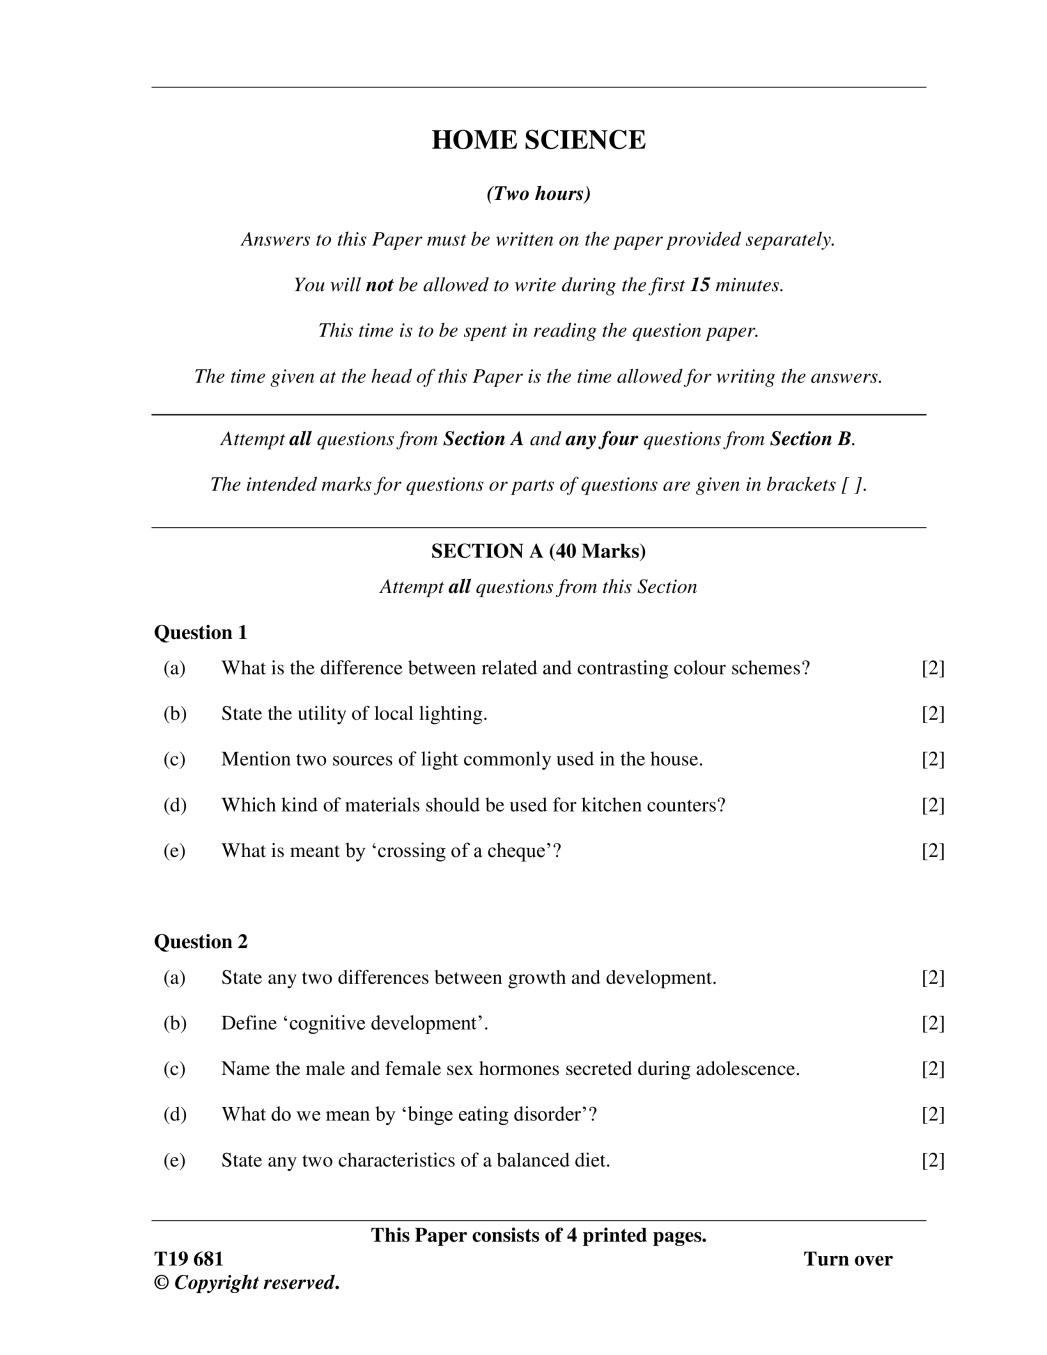 ICSE Class 10 Question Paper 2019 for Home Science  - Page 1